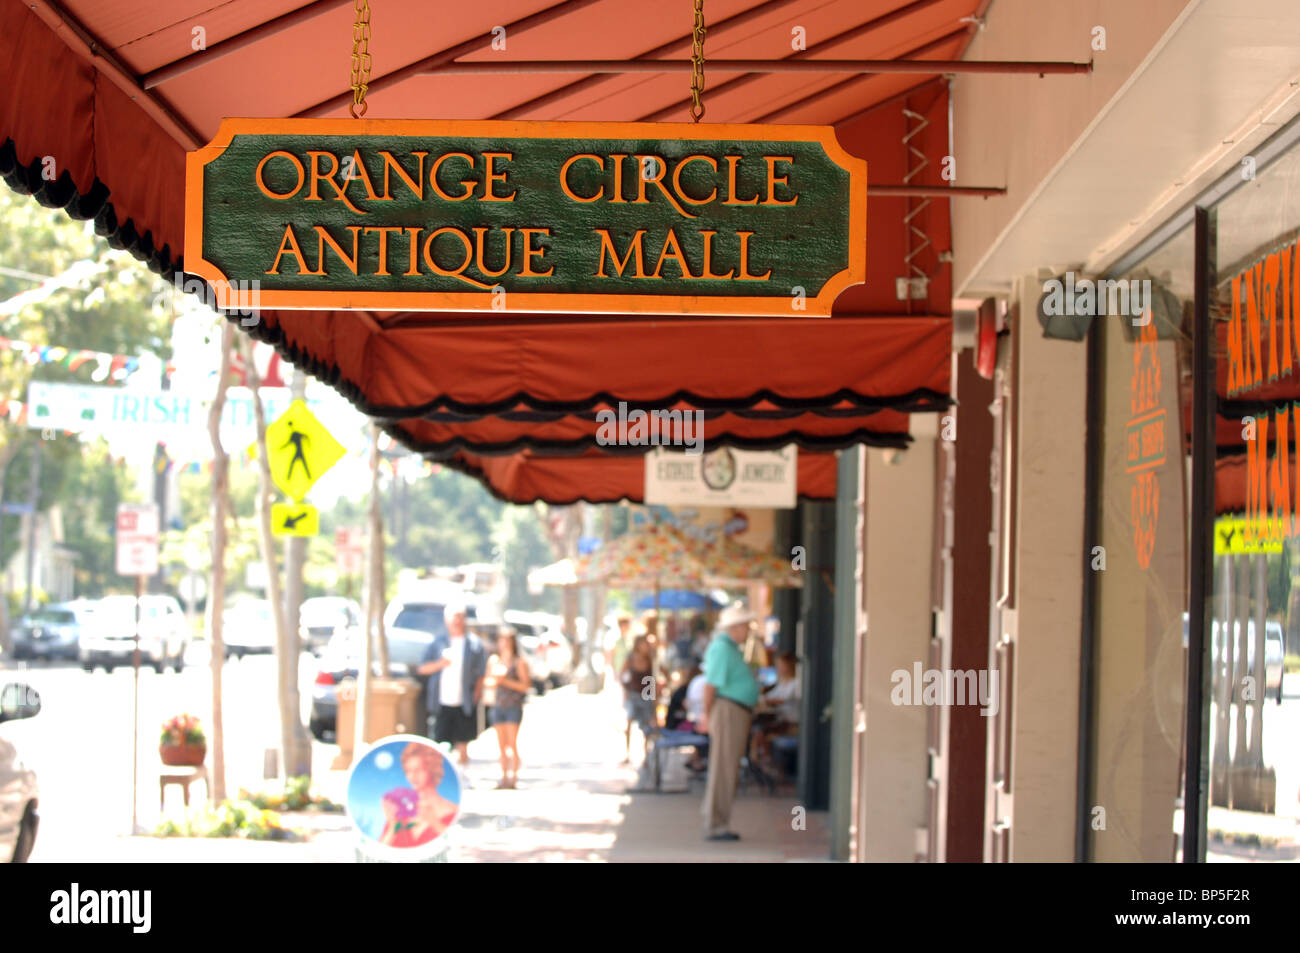 Orange Circle Antique Mall with several out-of-focus people in the background shopping on the sidewalk. Stock Photo